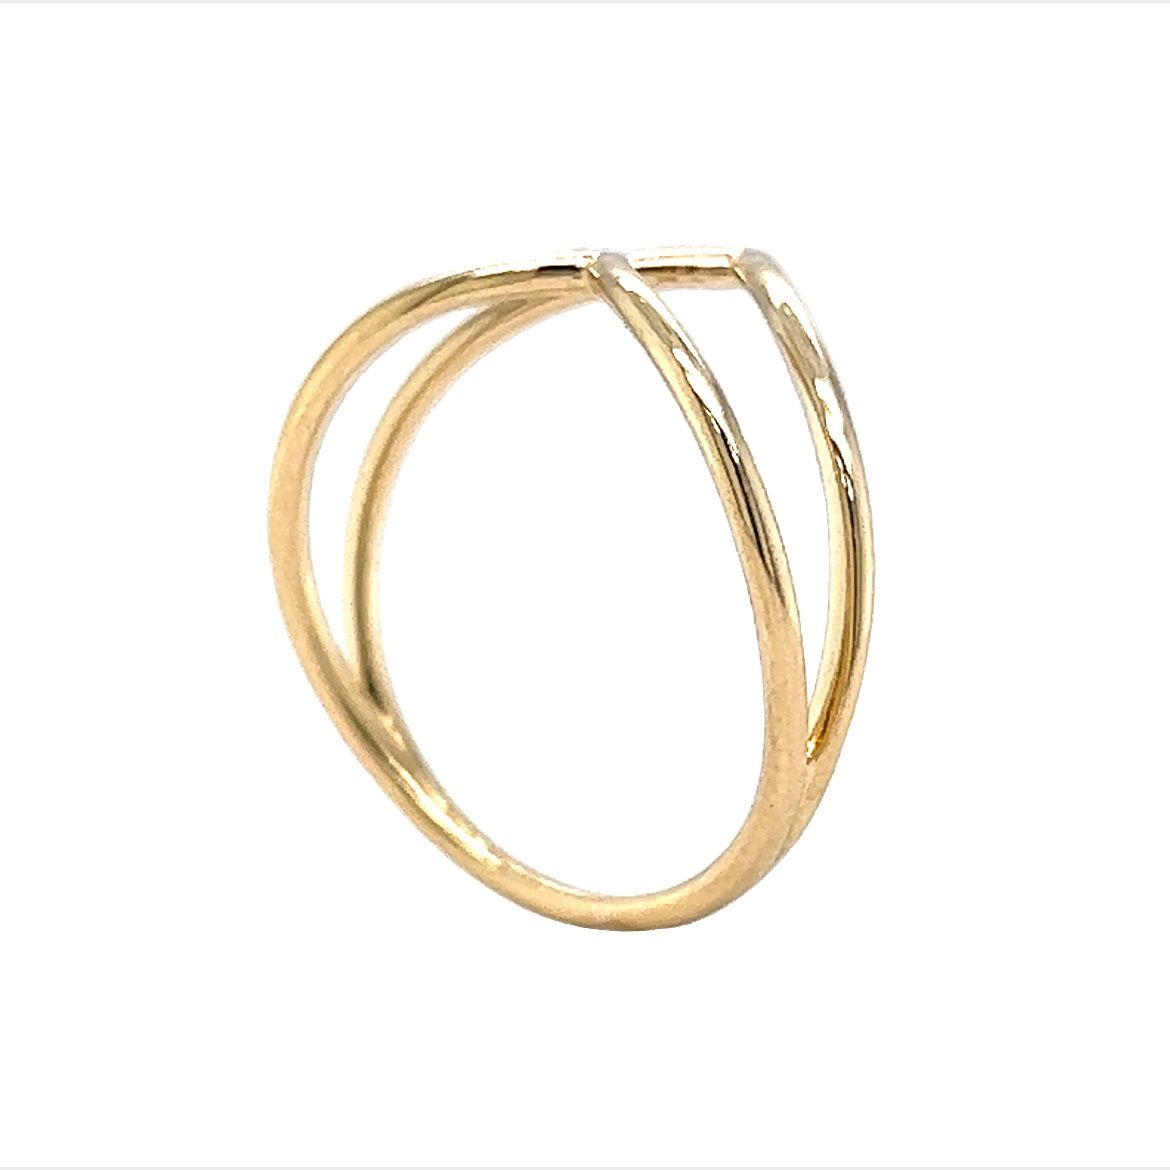 Double V Shaped Contour Wedding Band in 14k Yellow Gold